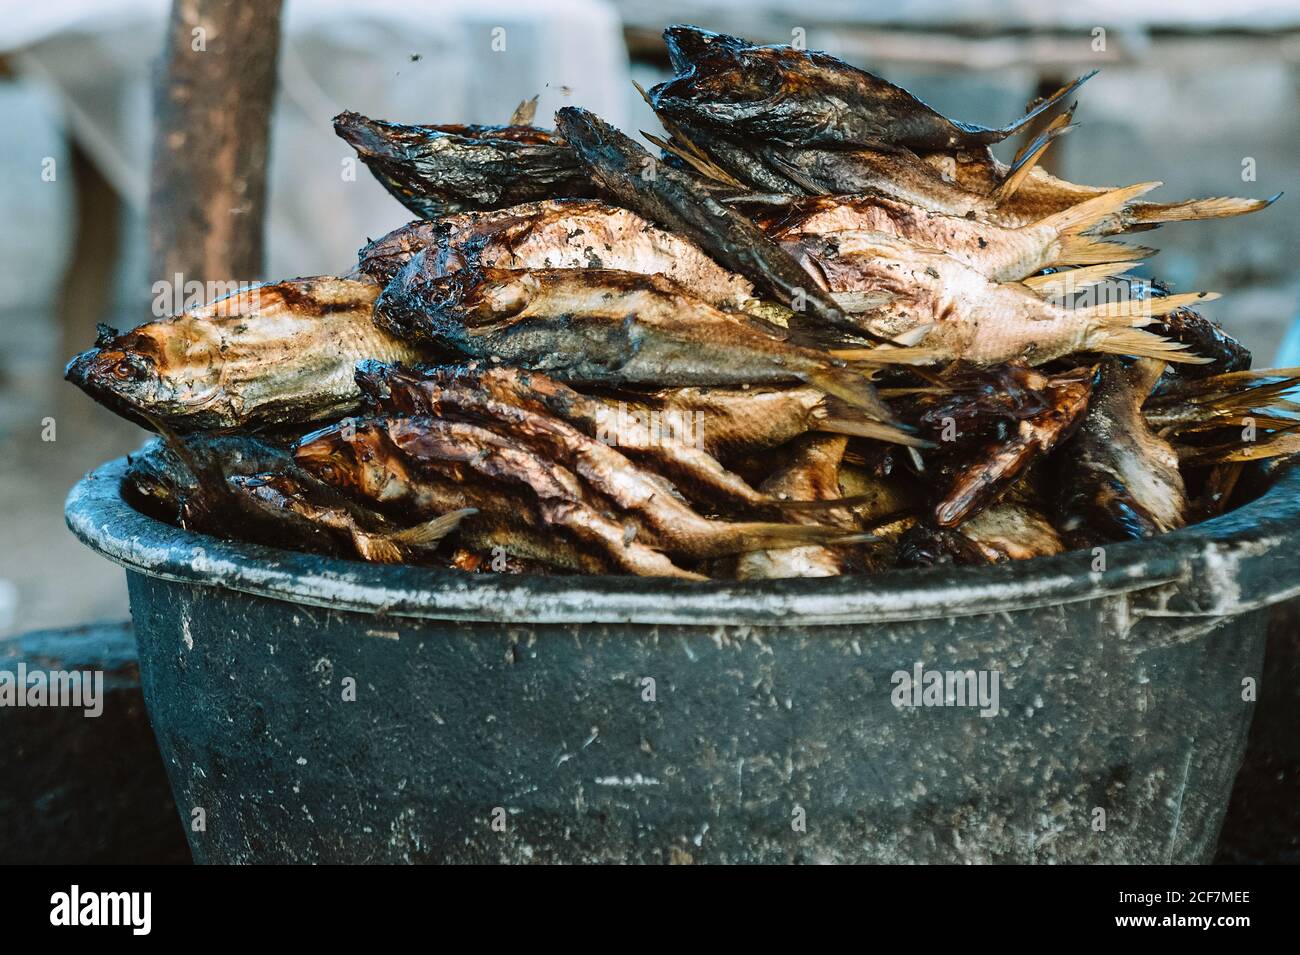 Shabby bowl with smelly dried fish placed on street market in Gambia Stock Photo